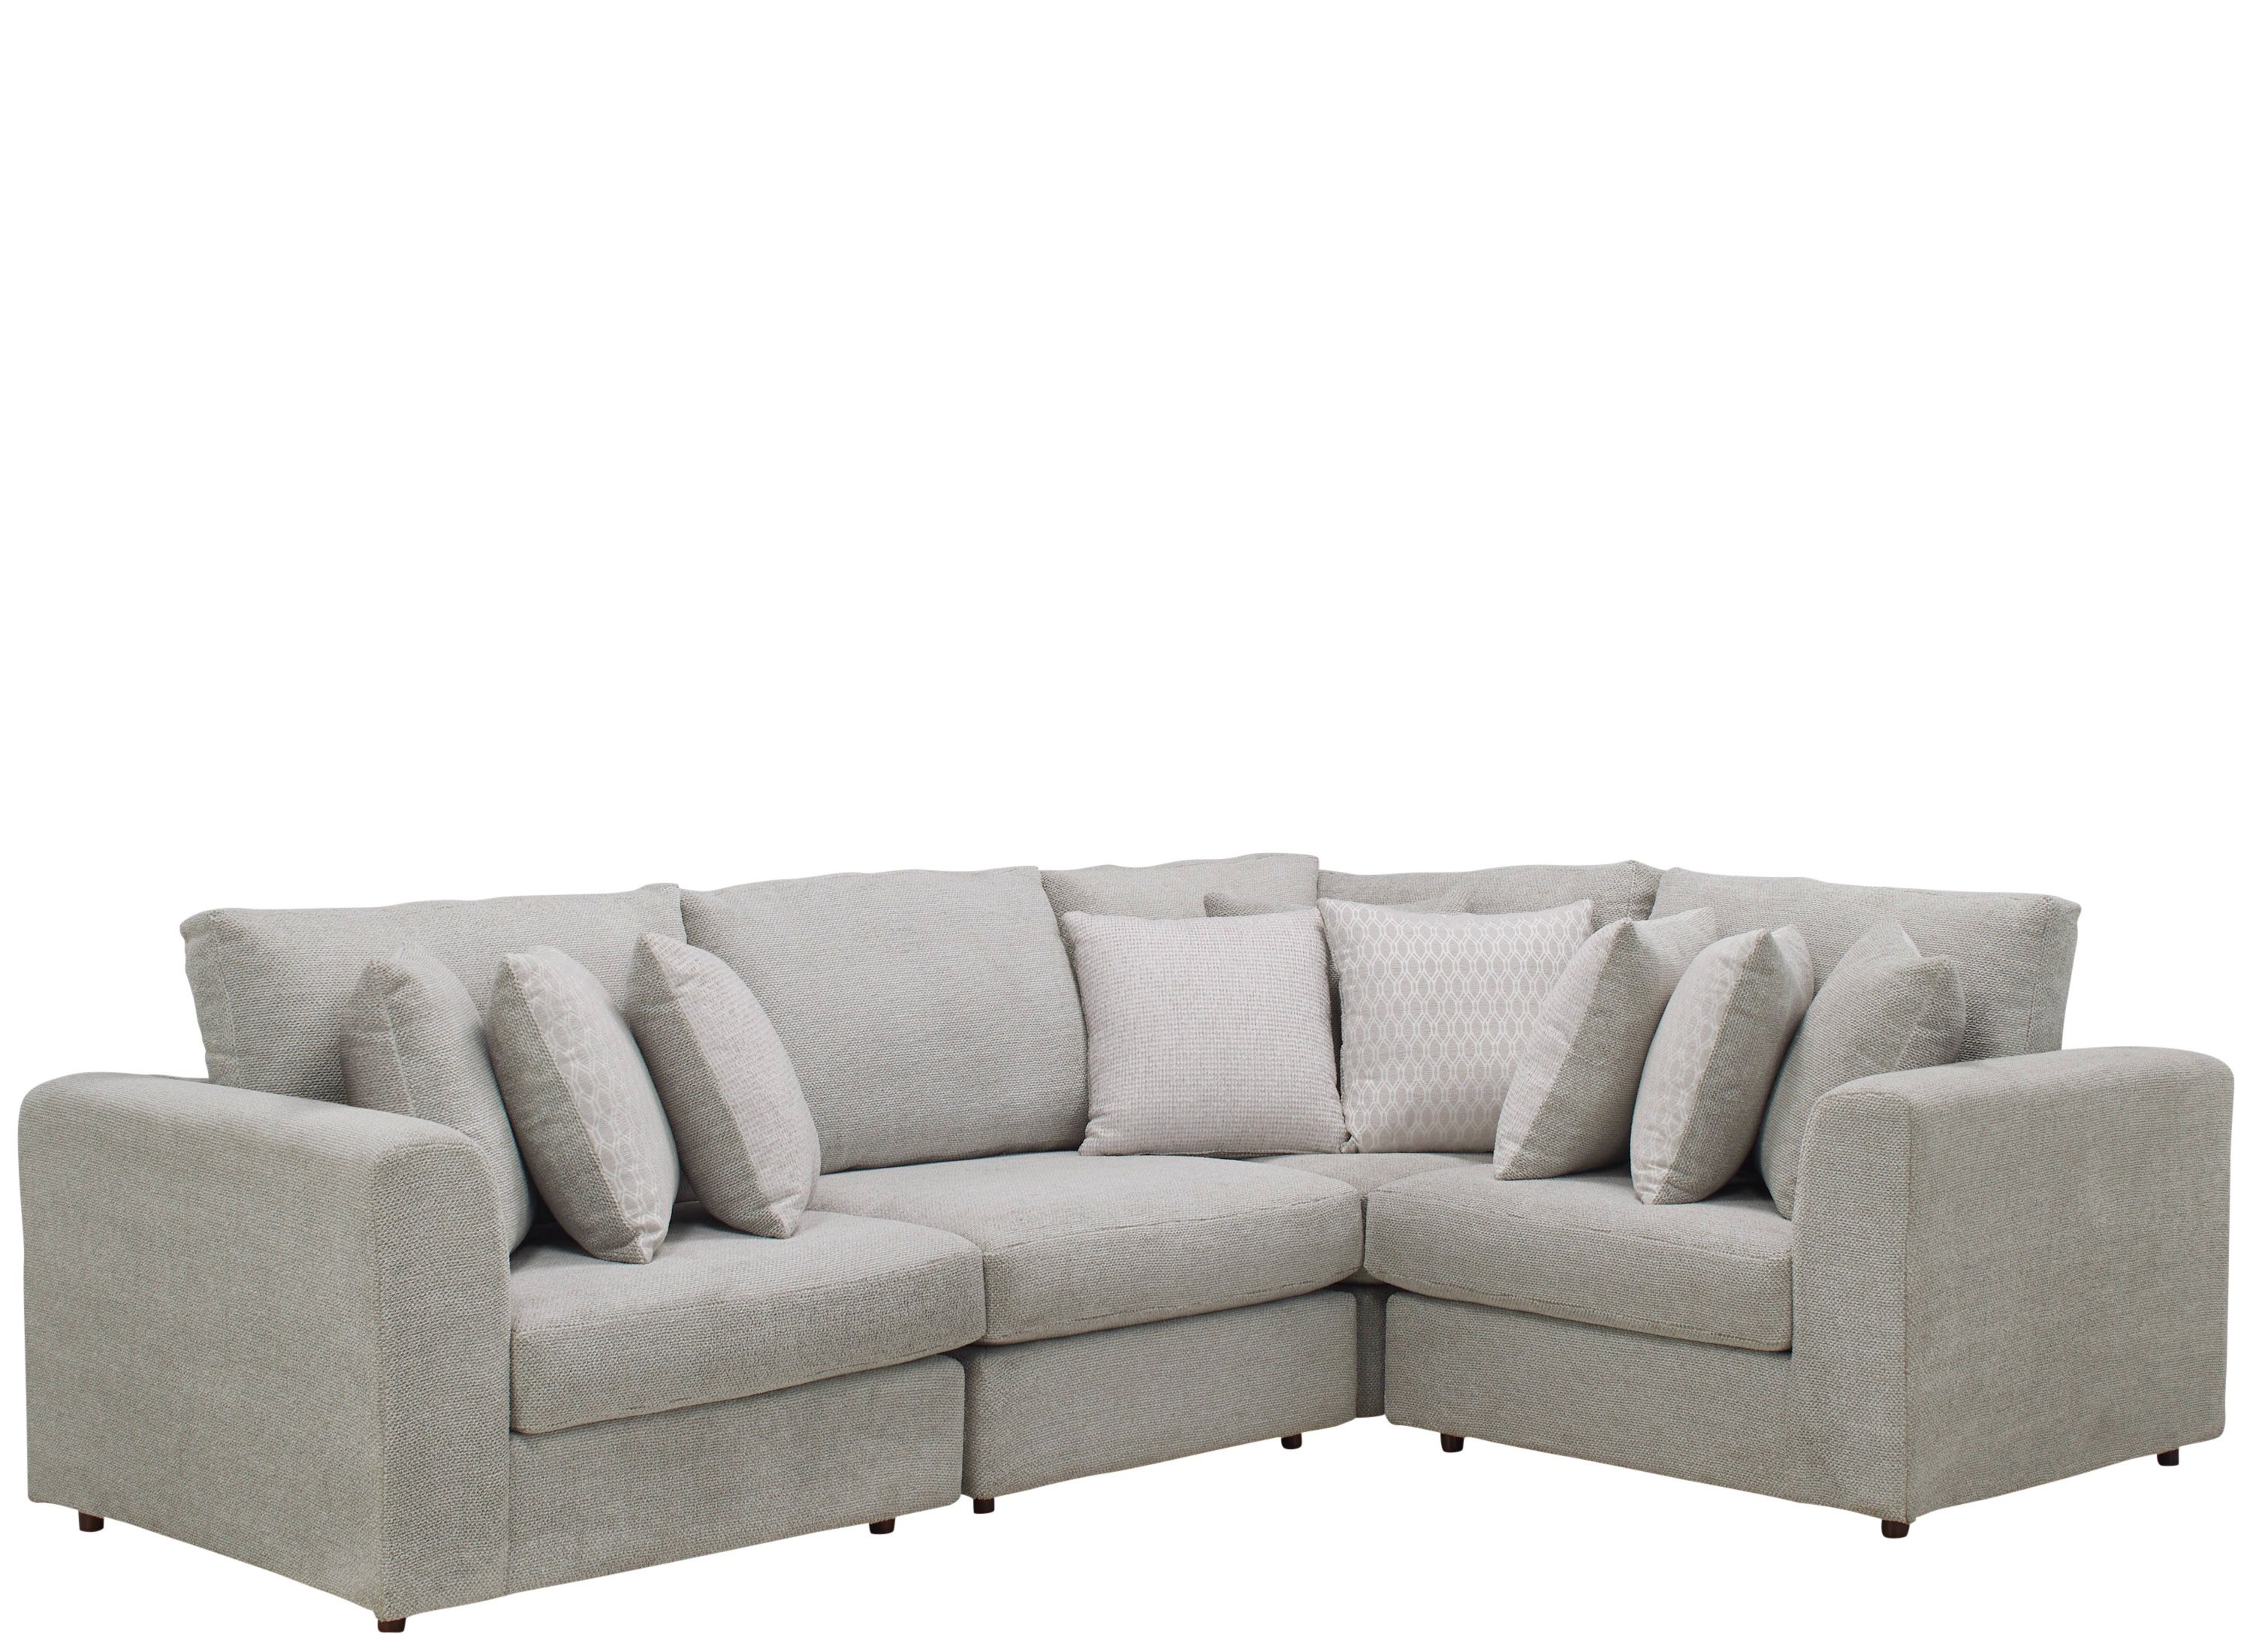 Cassio 4-pc. Sectional | Raymour & Flanigan